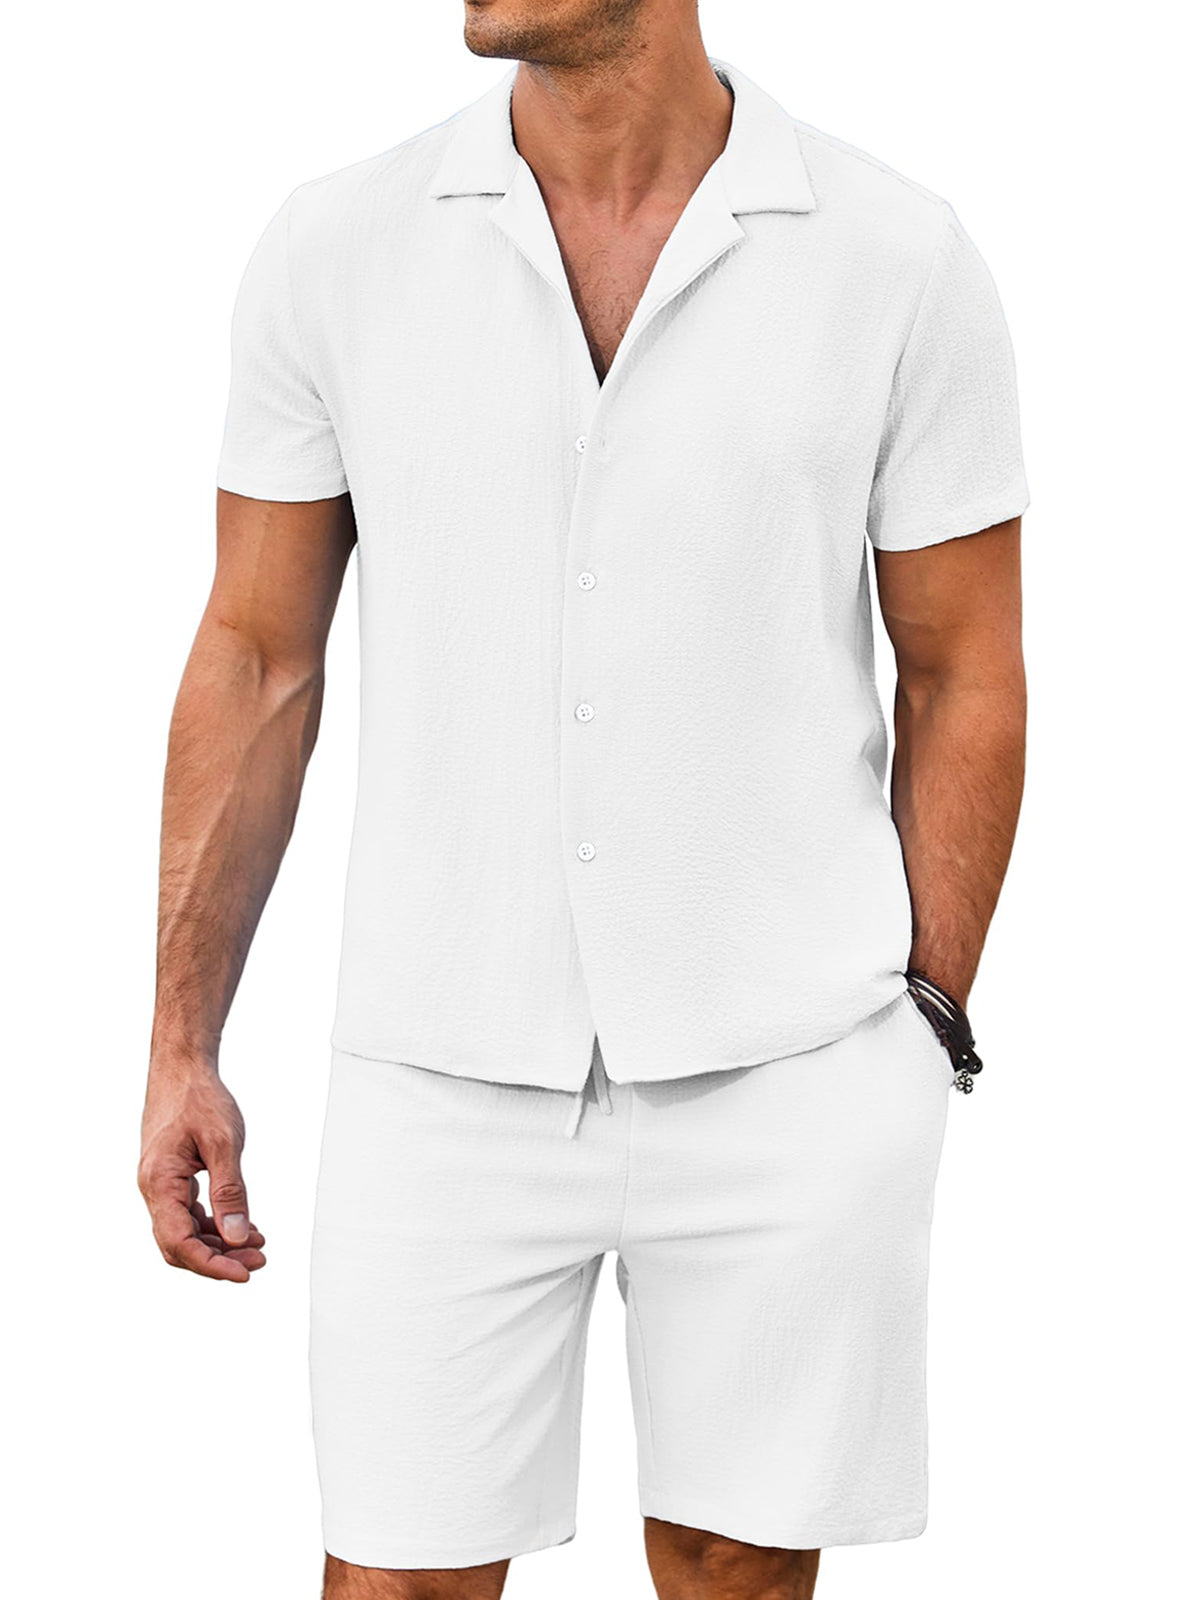 Men's Daily Comfortable Solid Color Puff Wrinkle Short Sleeve Shorts Set